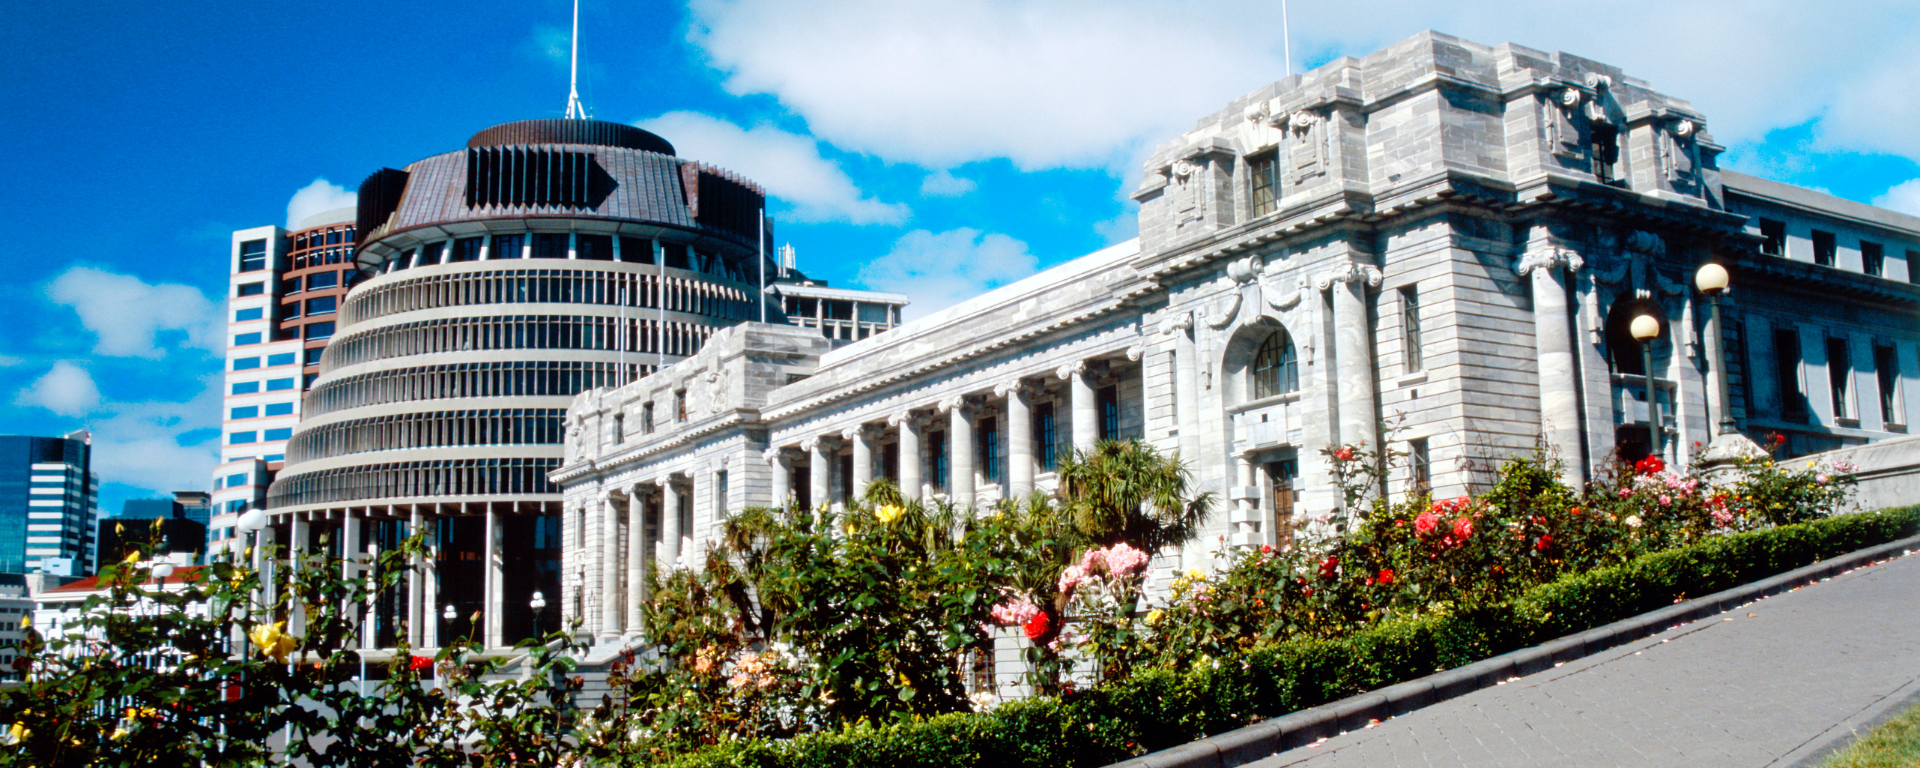 House of Parliament New Zealand